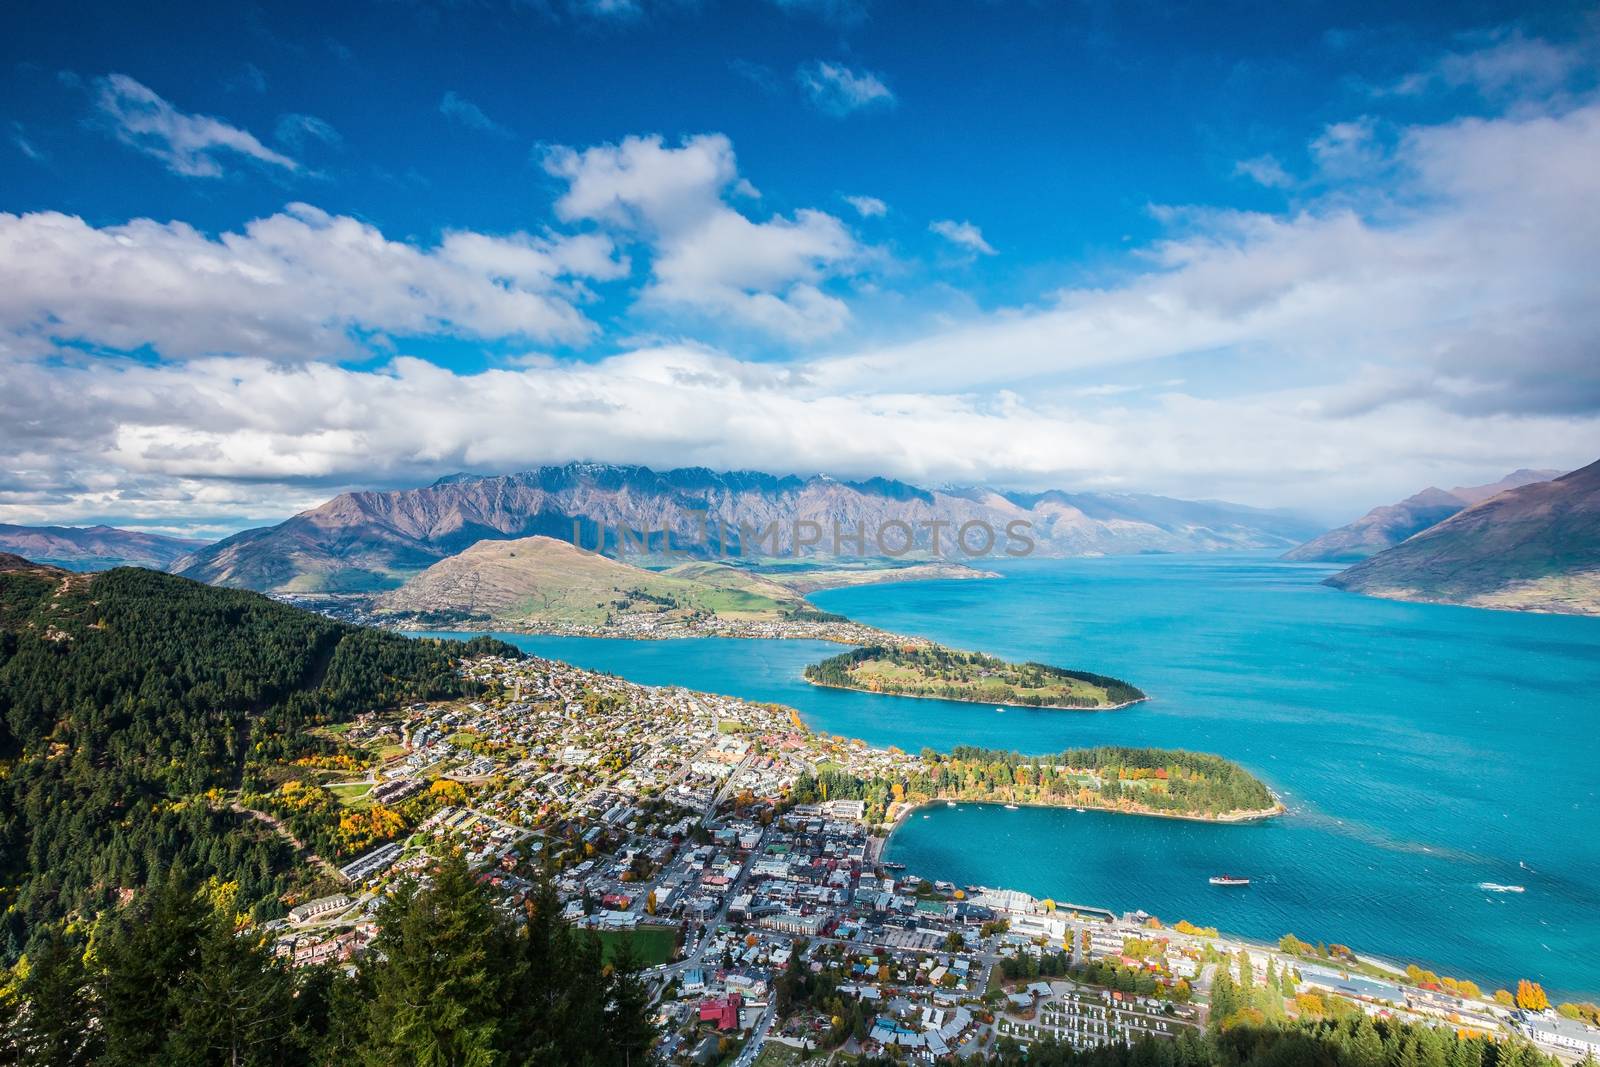 View of Queenstown and The Remarkables, Queenstown New Zealand